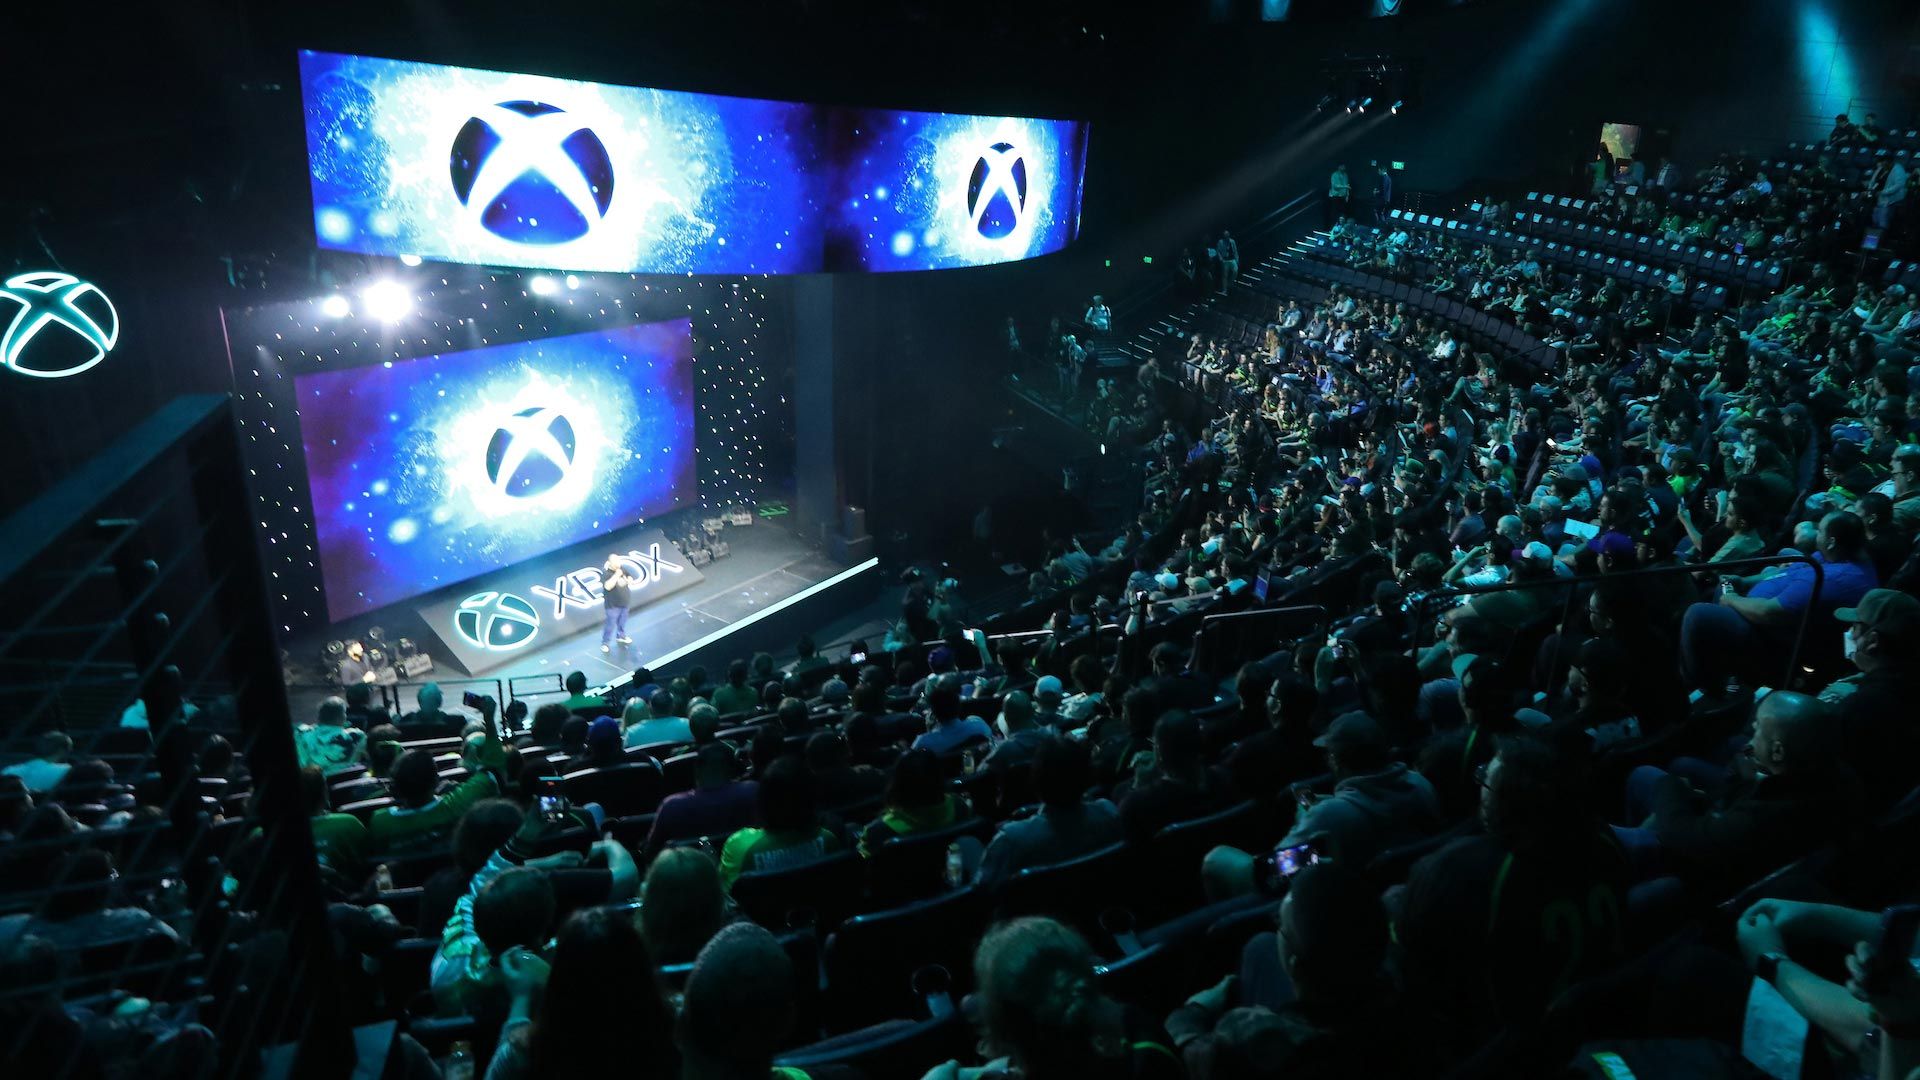 With Over 92 Million Views, Followers Made This the Most-Watched Xbox Present Ever